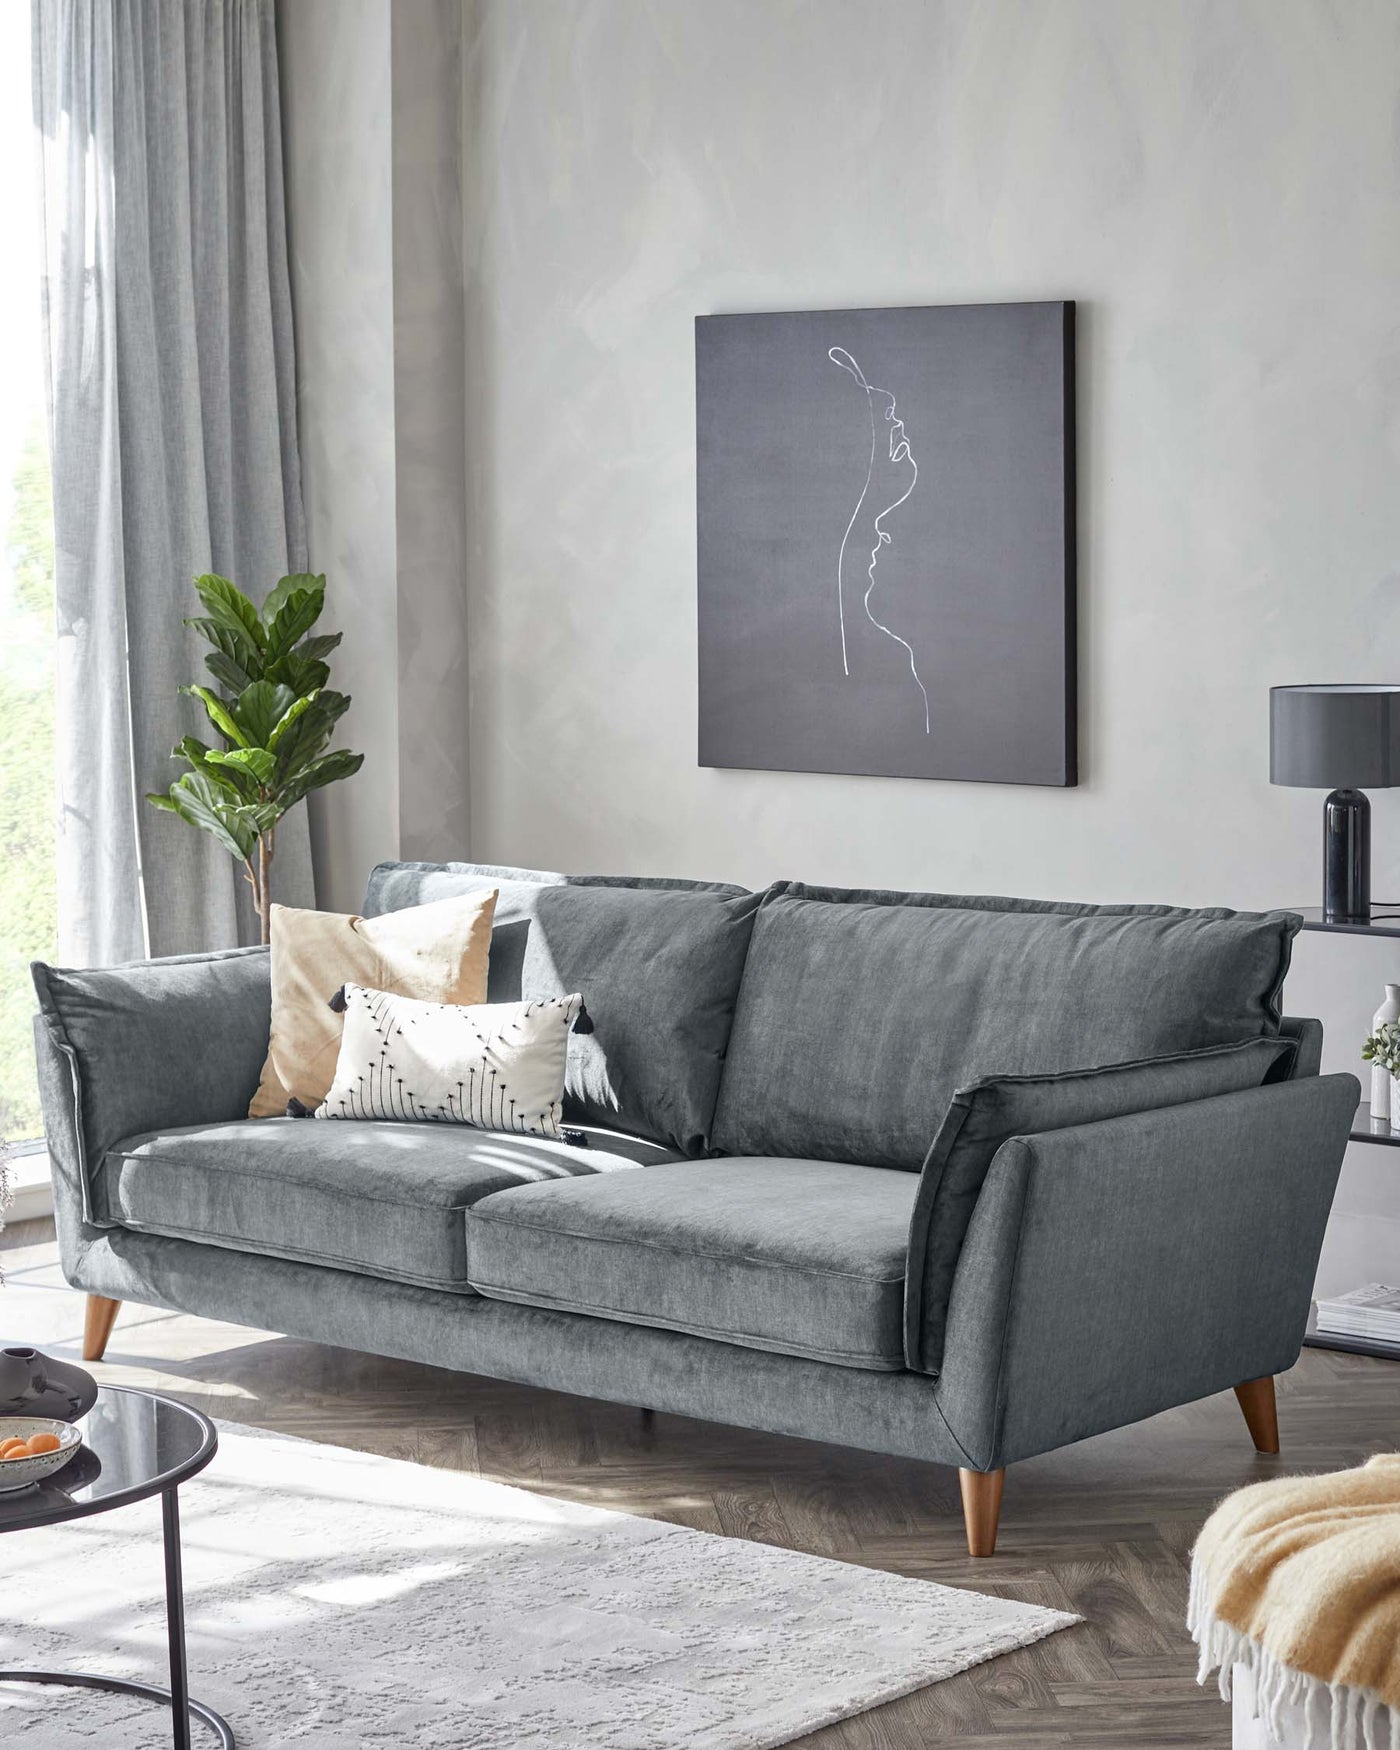 A contemporary three-seater sofa with plush grey fabric upholstery, featuring a tufted backrest, clean lines, and wooden legs. The sofa is accessorized with assorted throw pillows in neutral tones. In the forefront, there's a round, black side table with a minimalistic design.